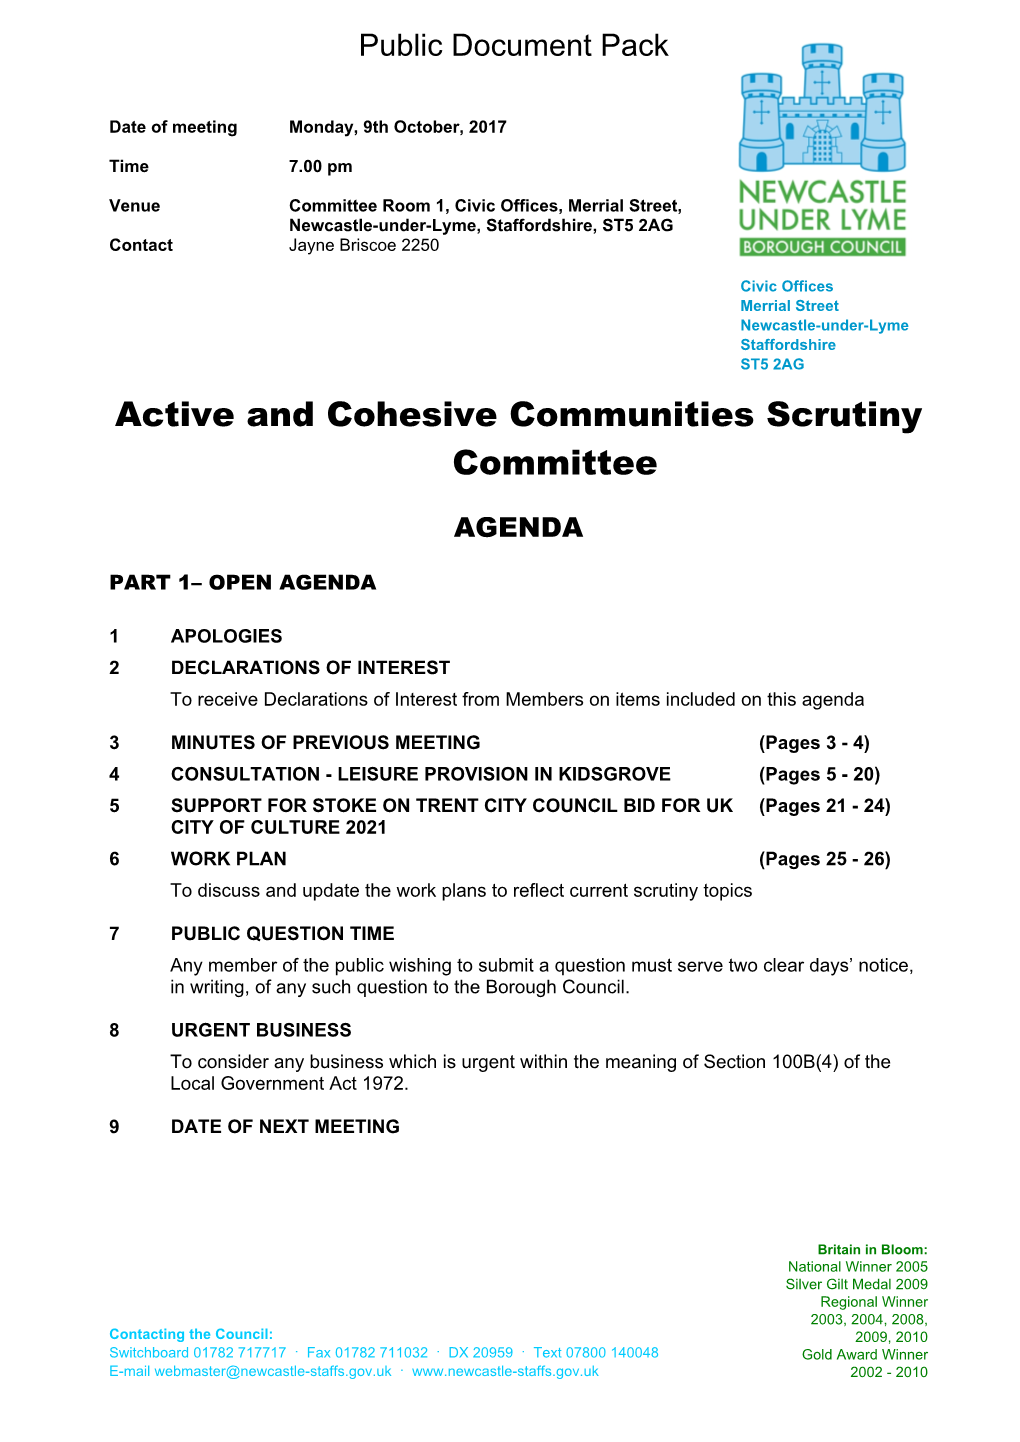 (Public Pack)Agenda Document for Active and Cohesive Communities